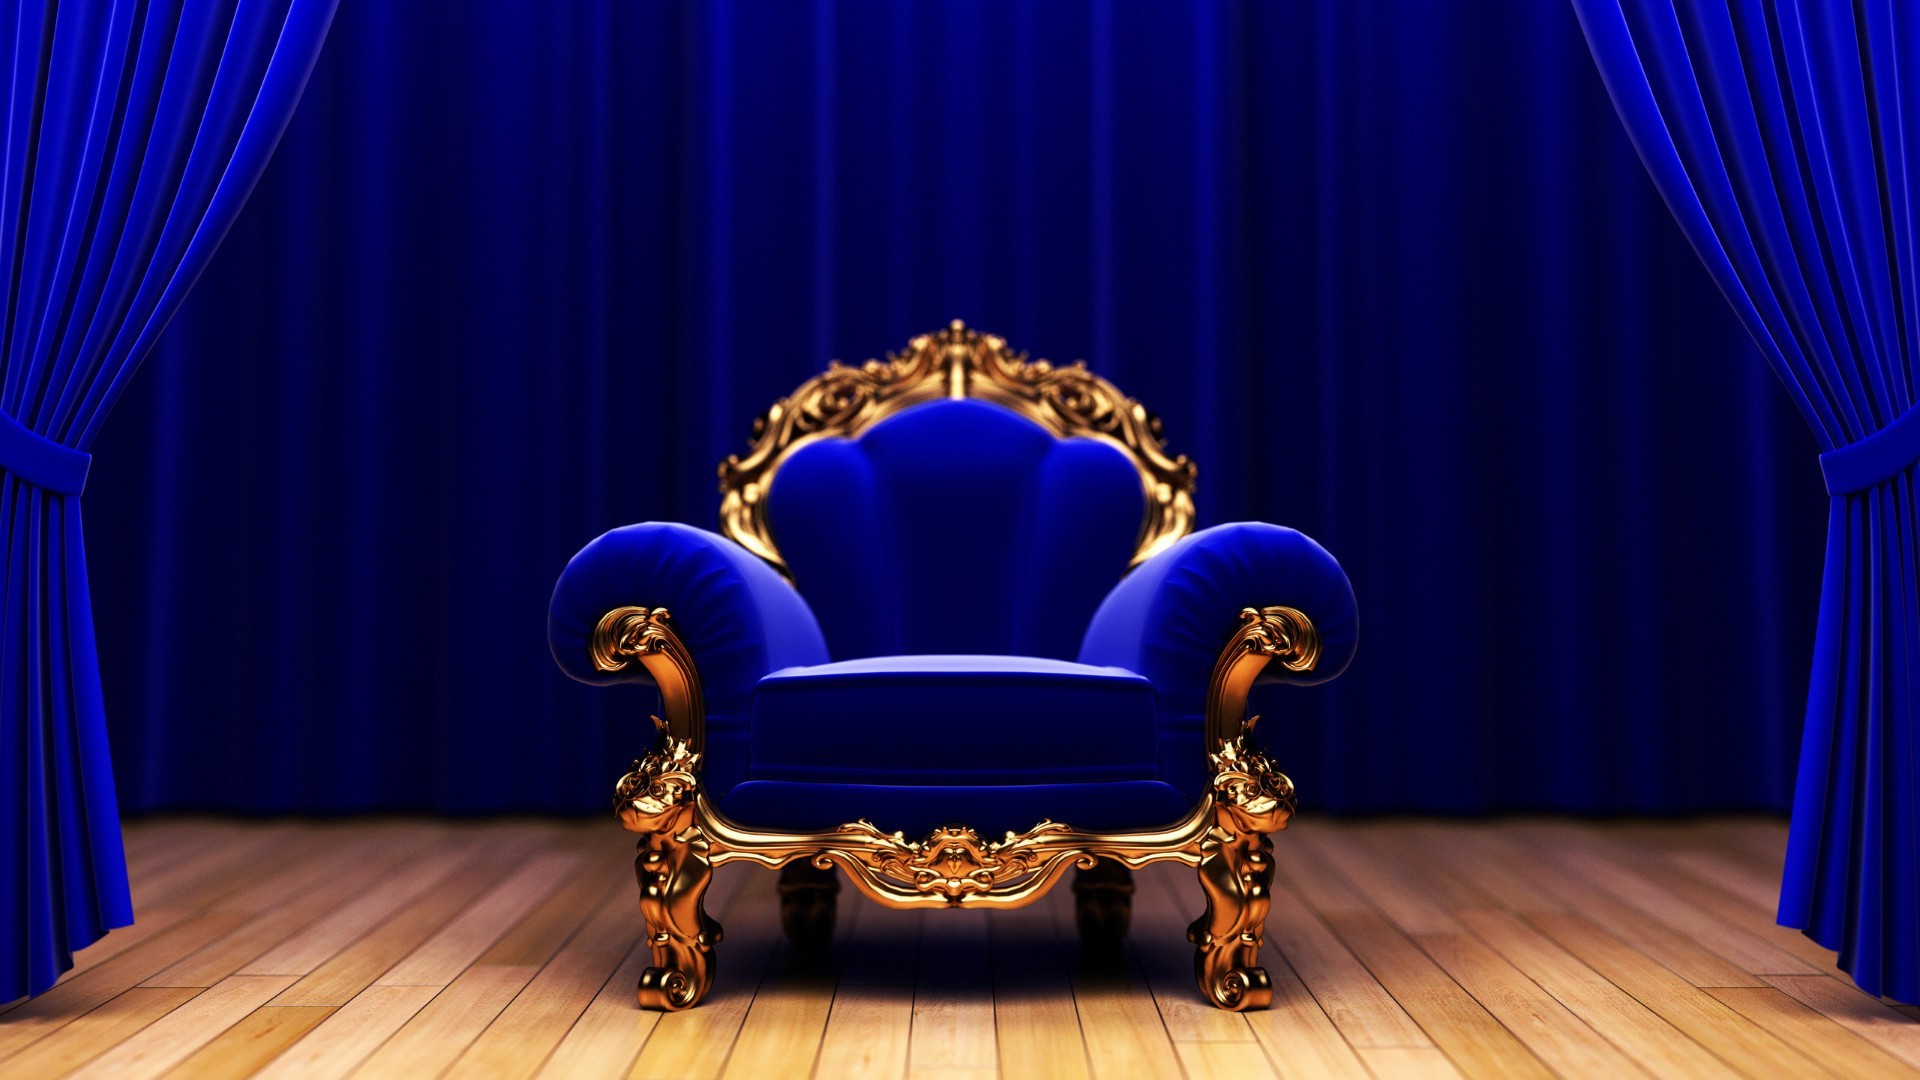 The blue chair on the stage - Phone wallpapers